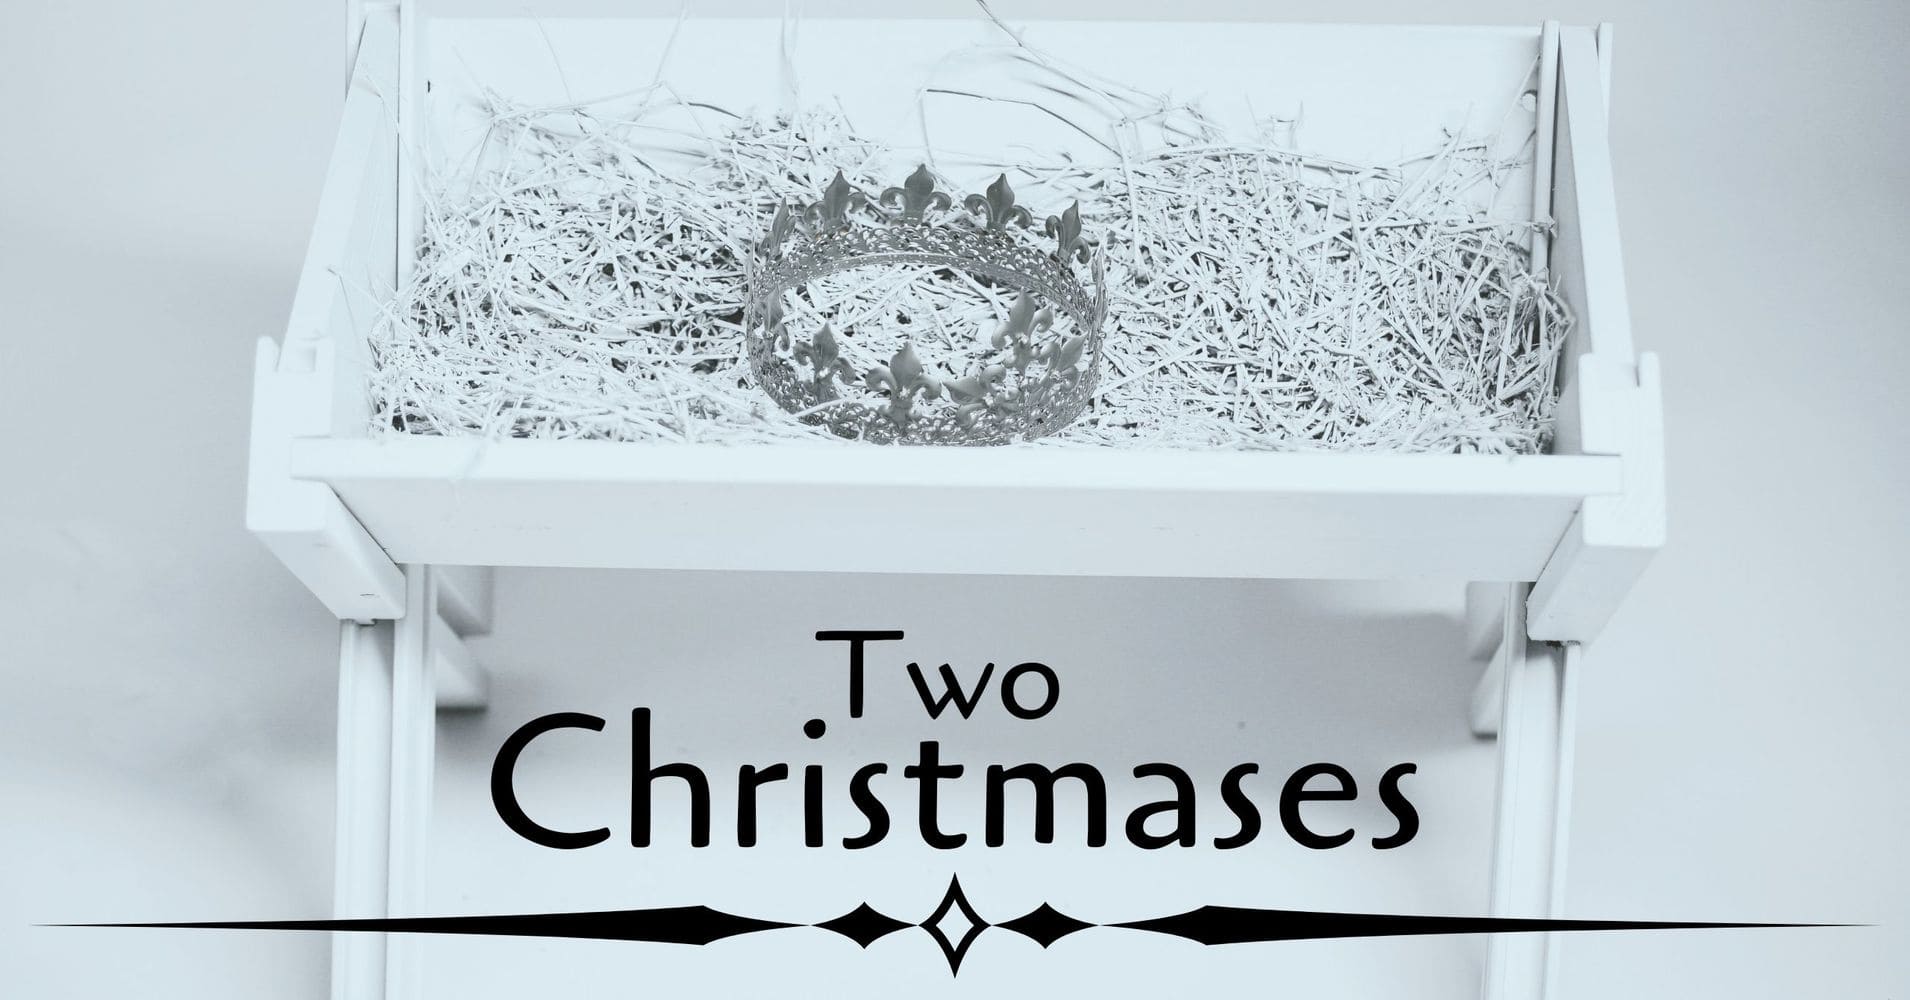 Featured image for “Two Christmases”